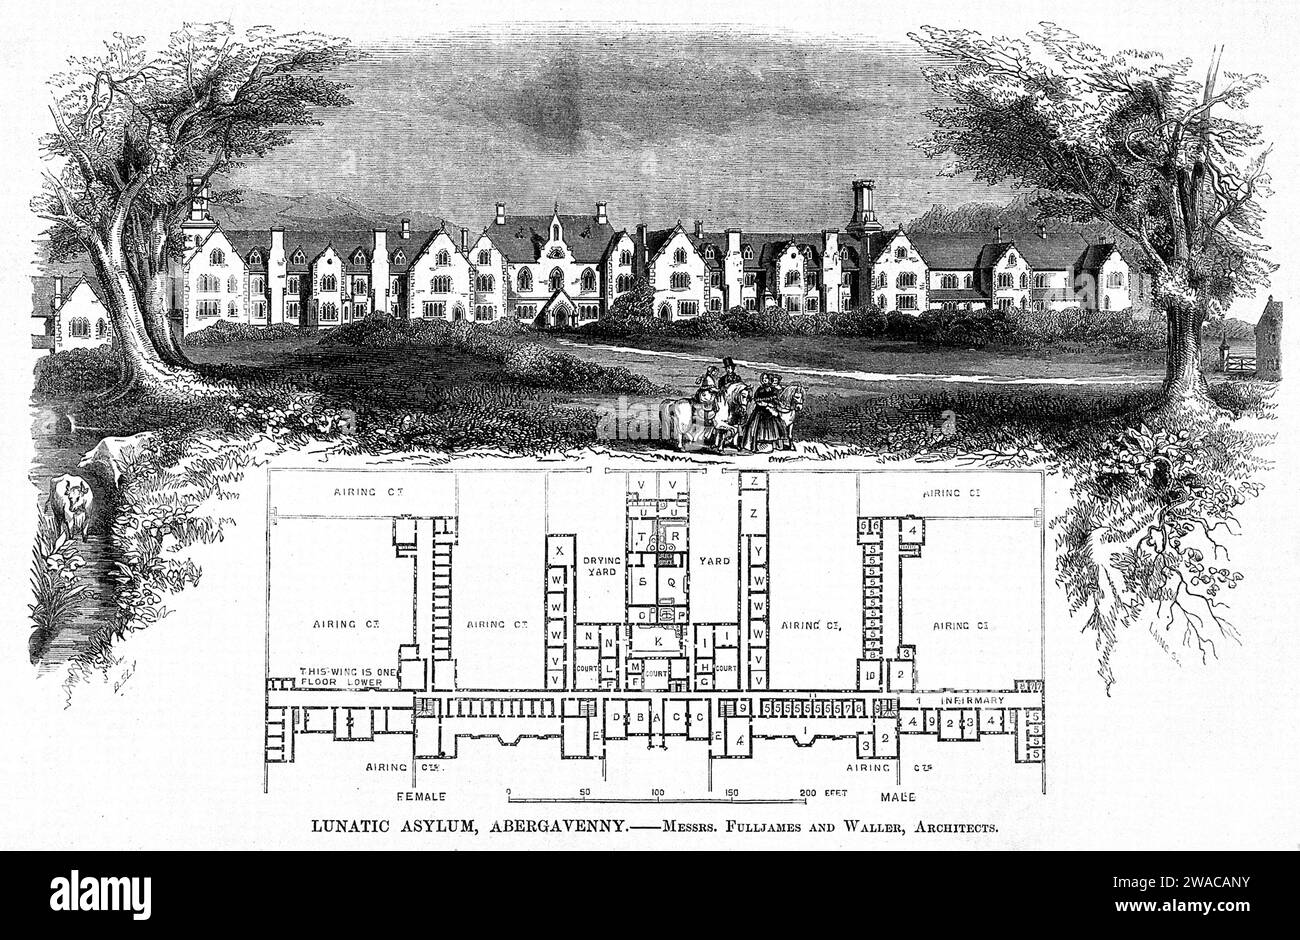 Plan and drawing of the lunatic asylum, Abergavenny, Wales, UK, published in The Builder, a weekly magazine, 1851, The Builder Stock Photo